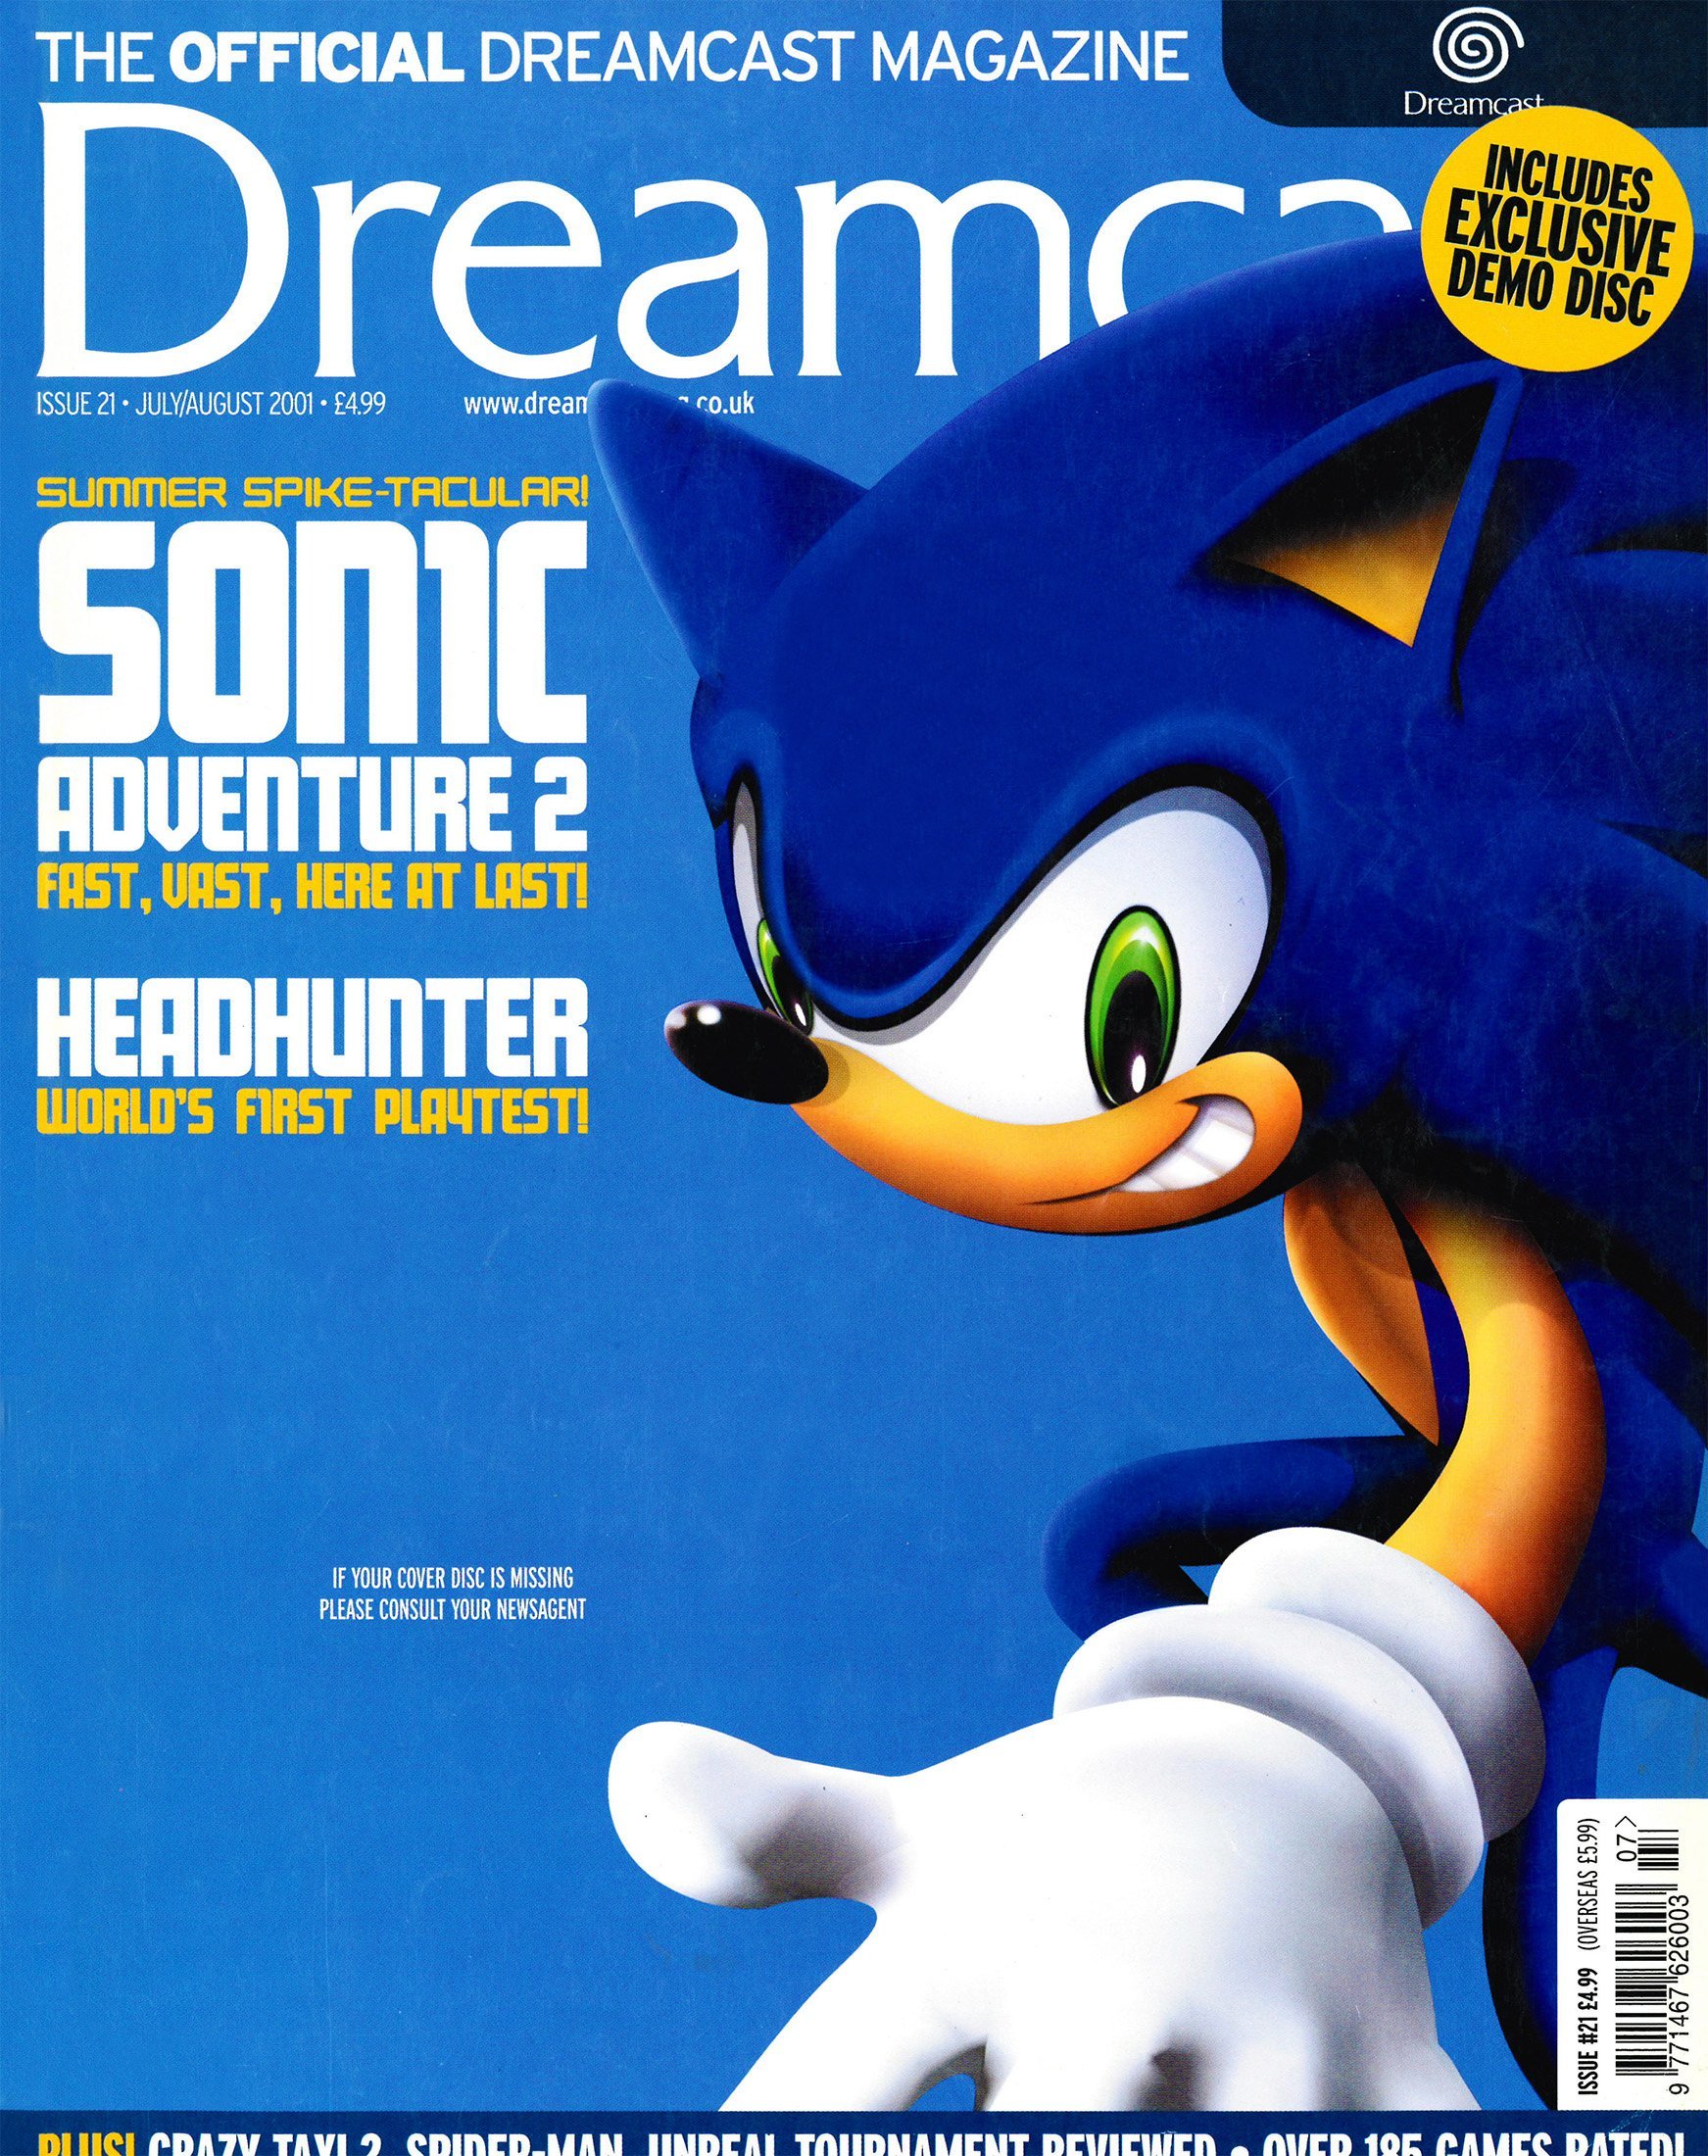 Official Dreamcast Magazine 21 (July/August 2001)